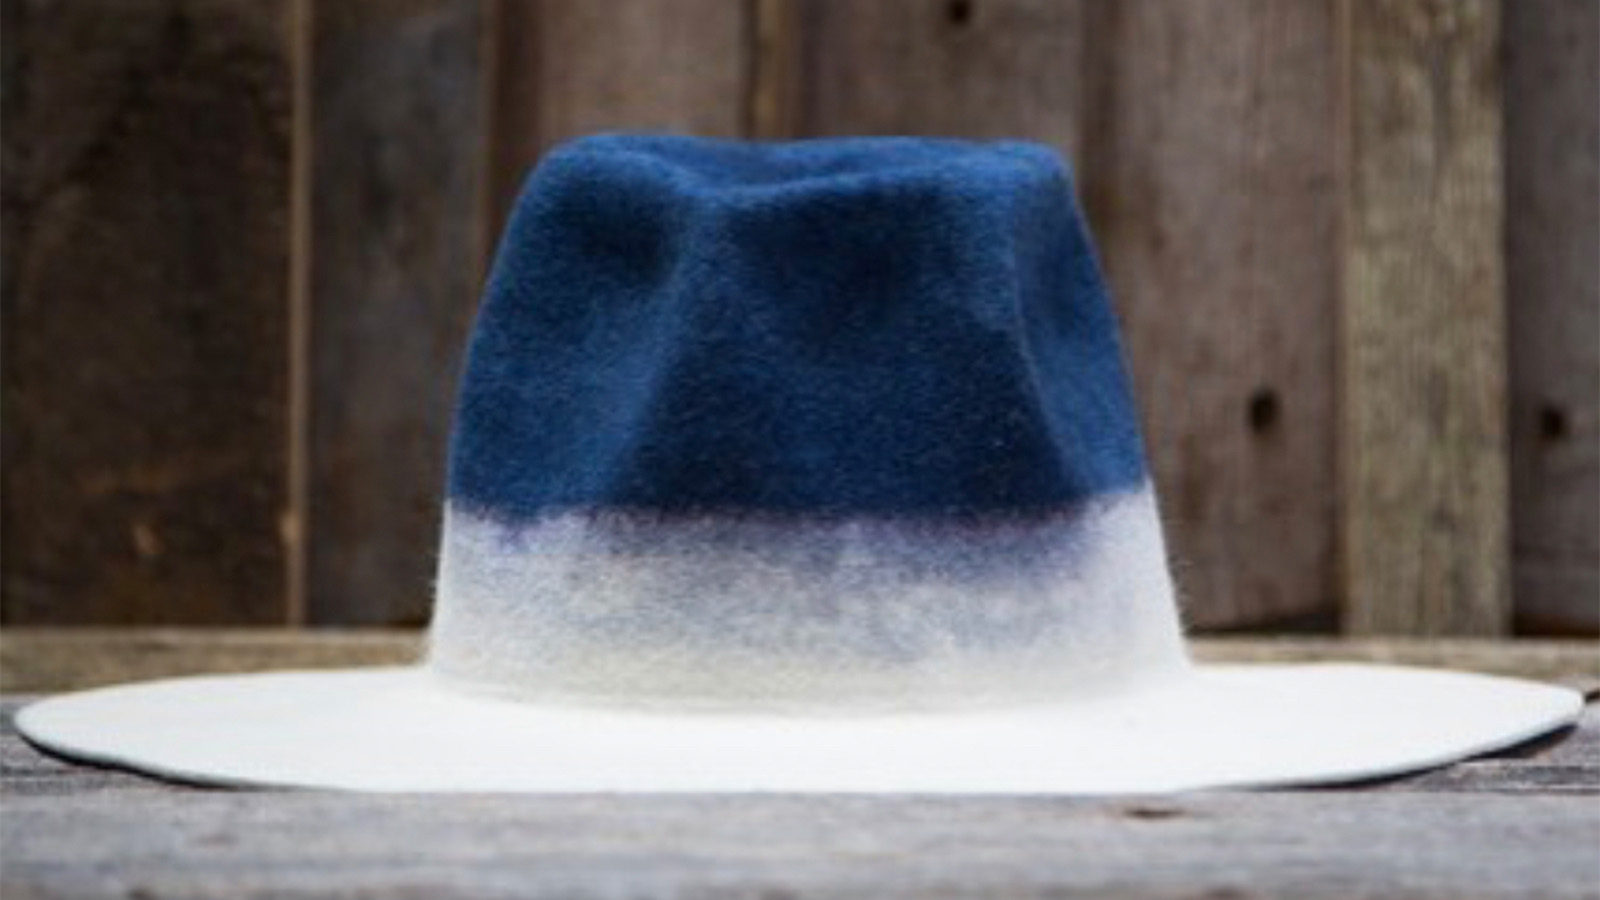 Design
Indigo dyed
Material
100% Western Beaver Fur Felt Hat sustainably acquired
Specifications
125 grams of Wild Beaver Fur Felt.  Handcrafted in our atelier in NYC.  Please allow 6-8 weeks to custom make this special piece.